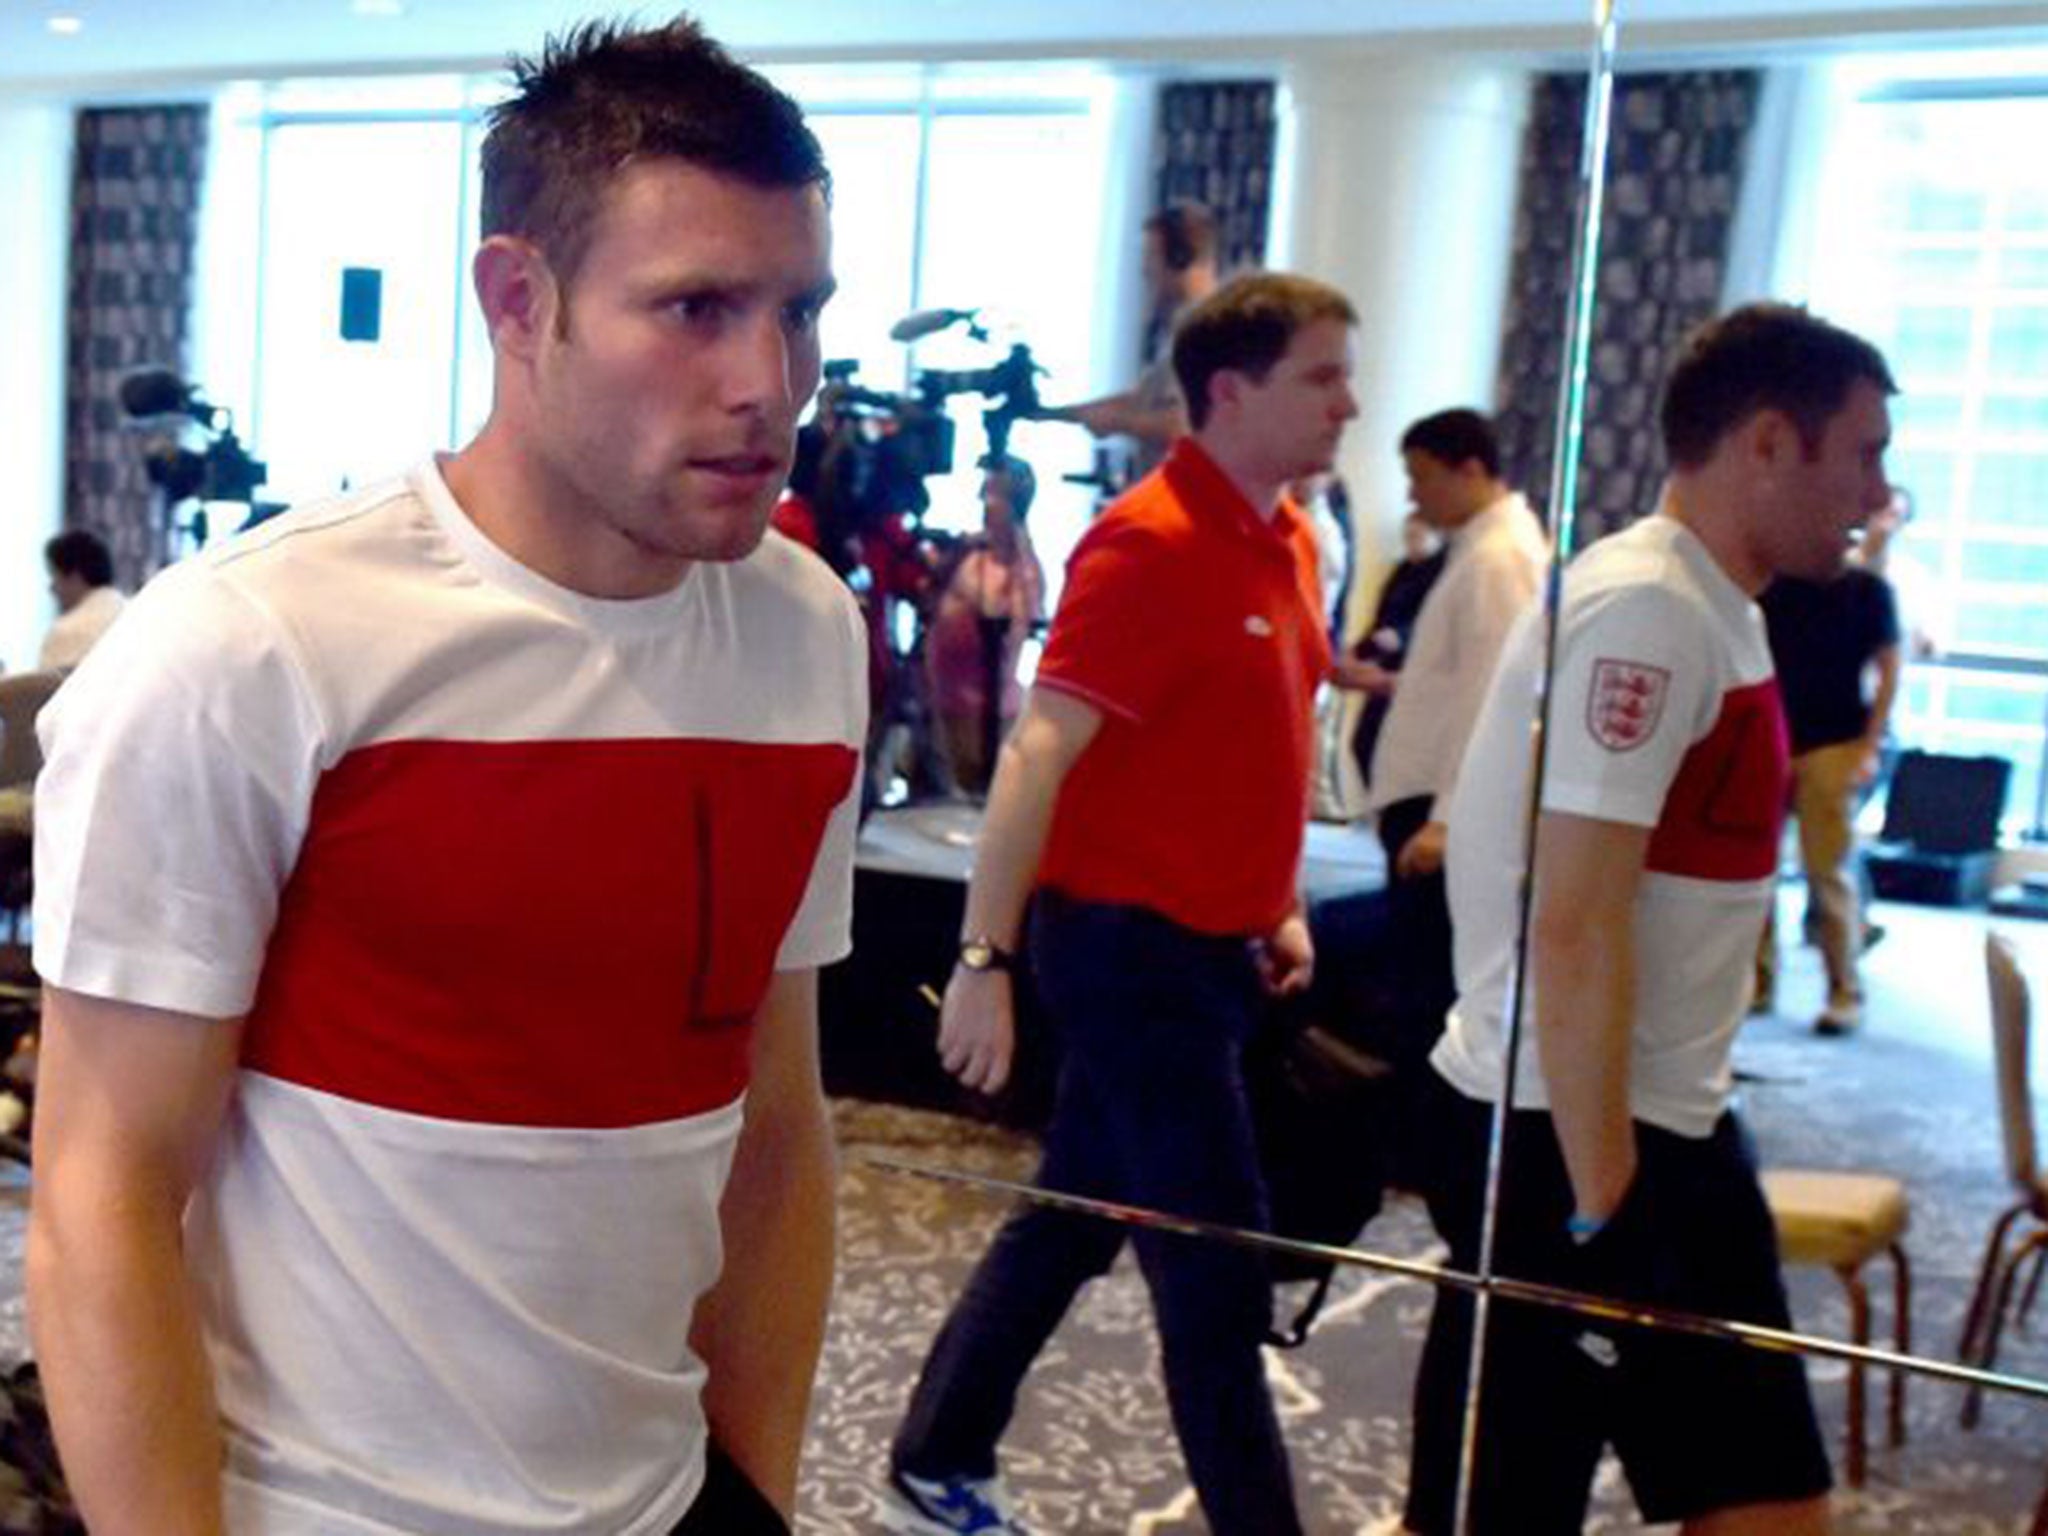 Contrary to Twitter, James Milner does not shop at Asda